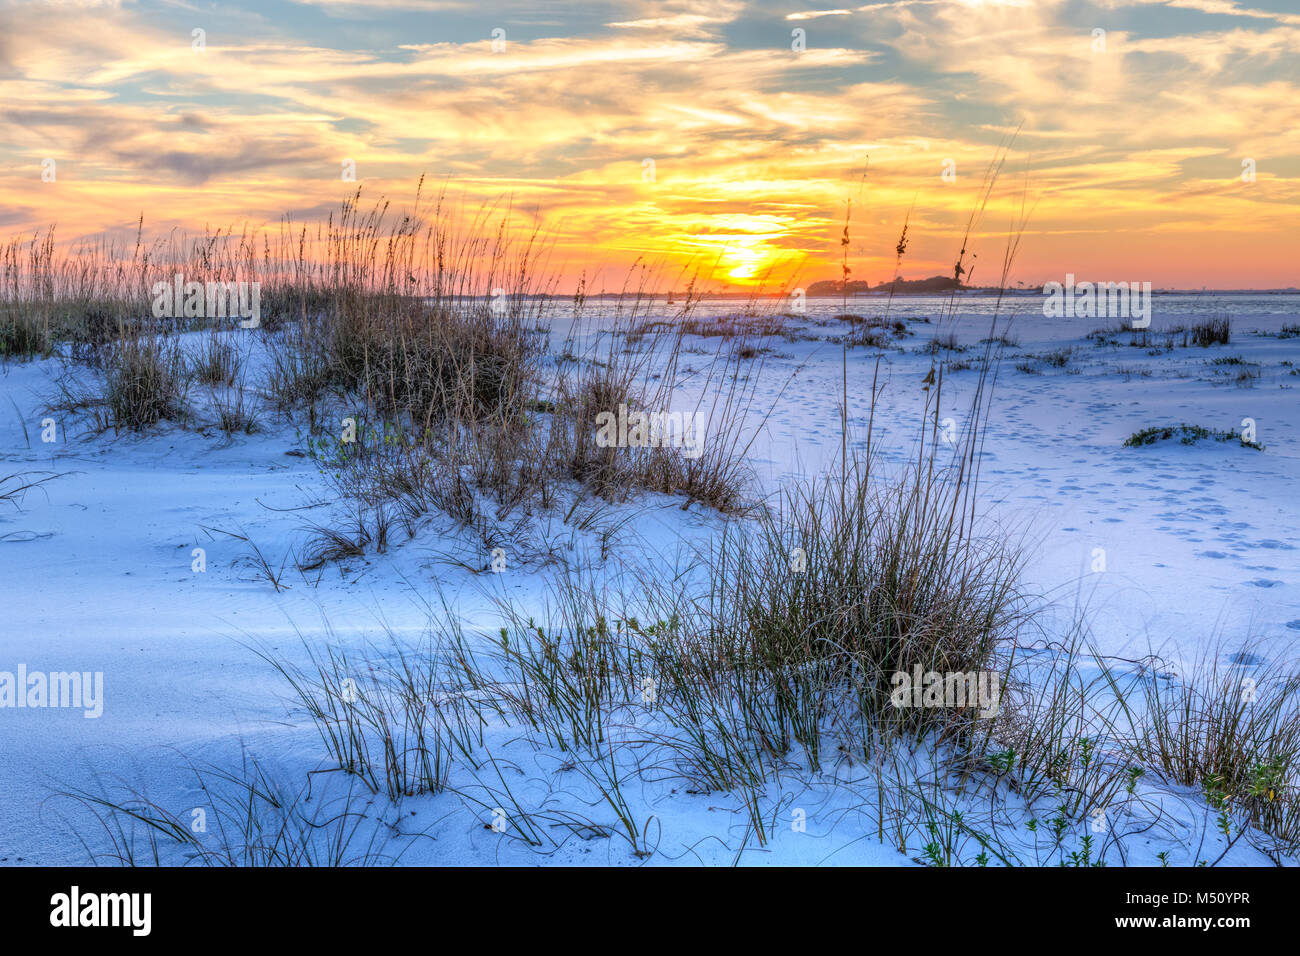 A colorful sunset over the seaoats and dunes on Fort Pickens Beach in the Gulf Islands National Seashore, Florida. Stock Photo